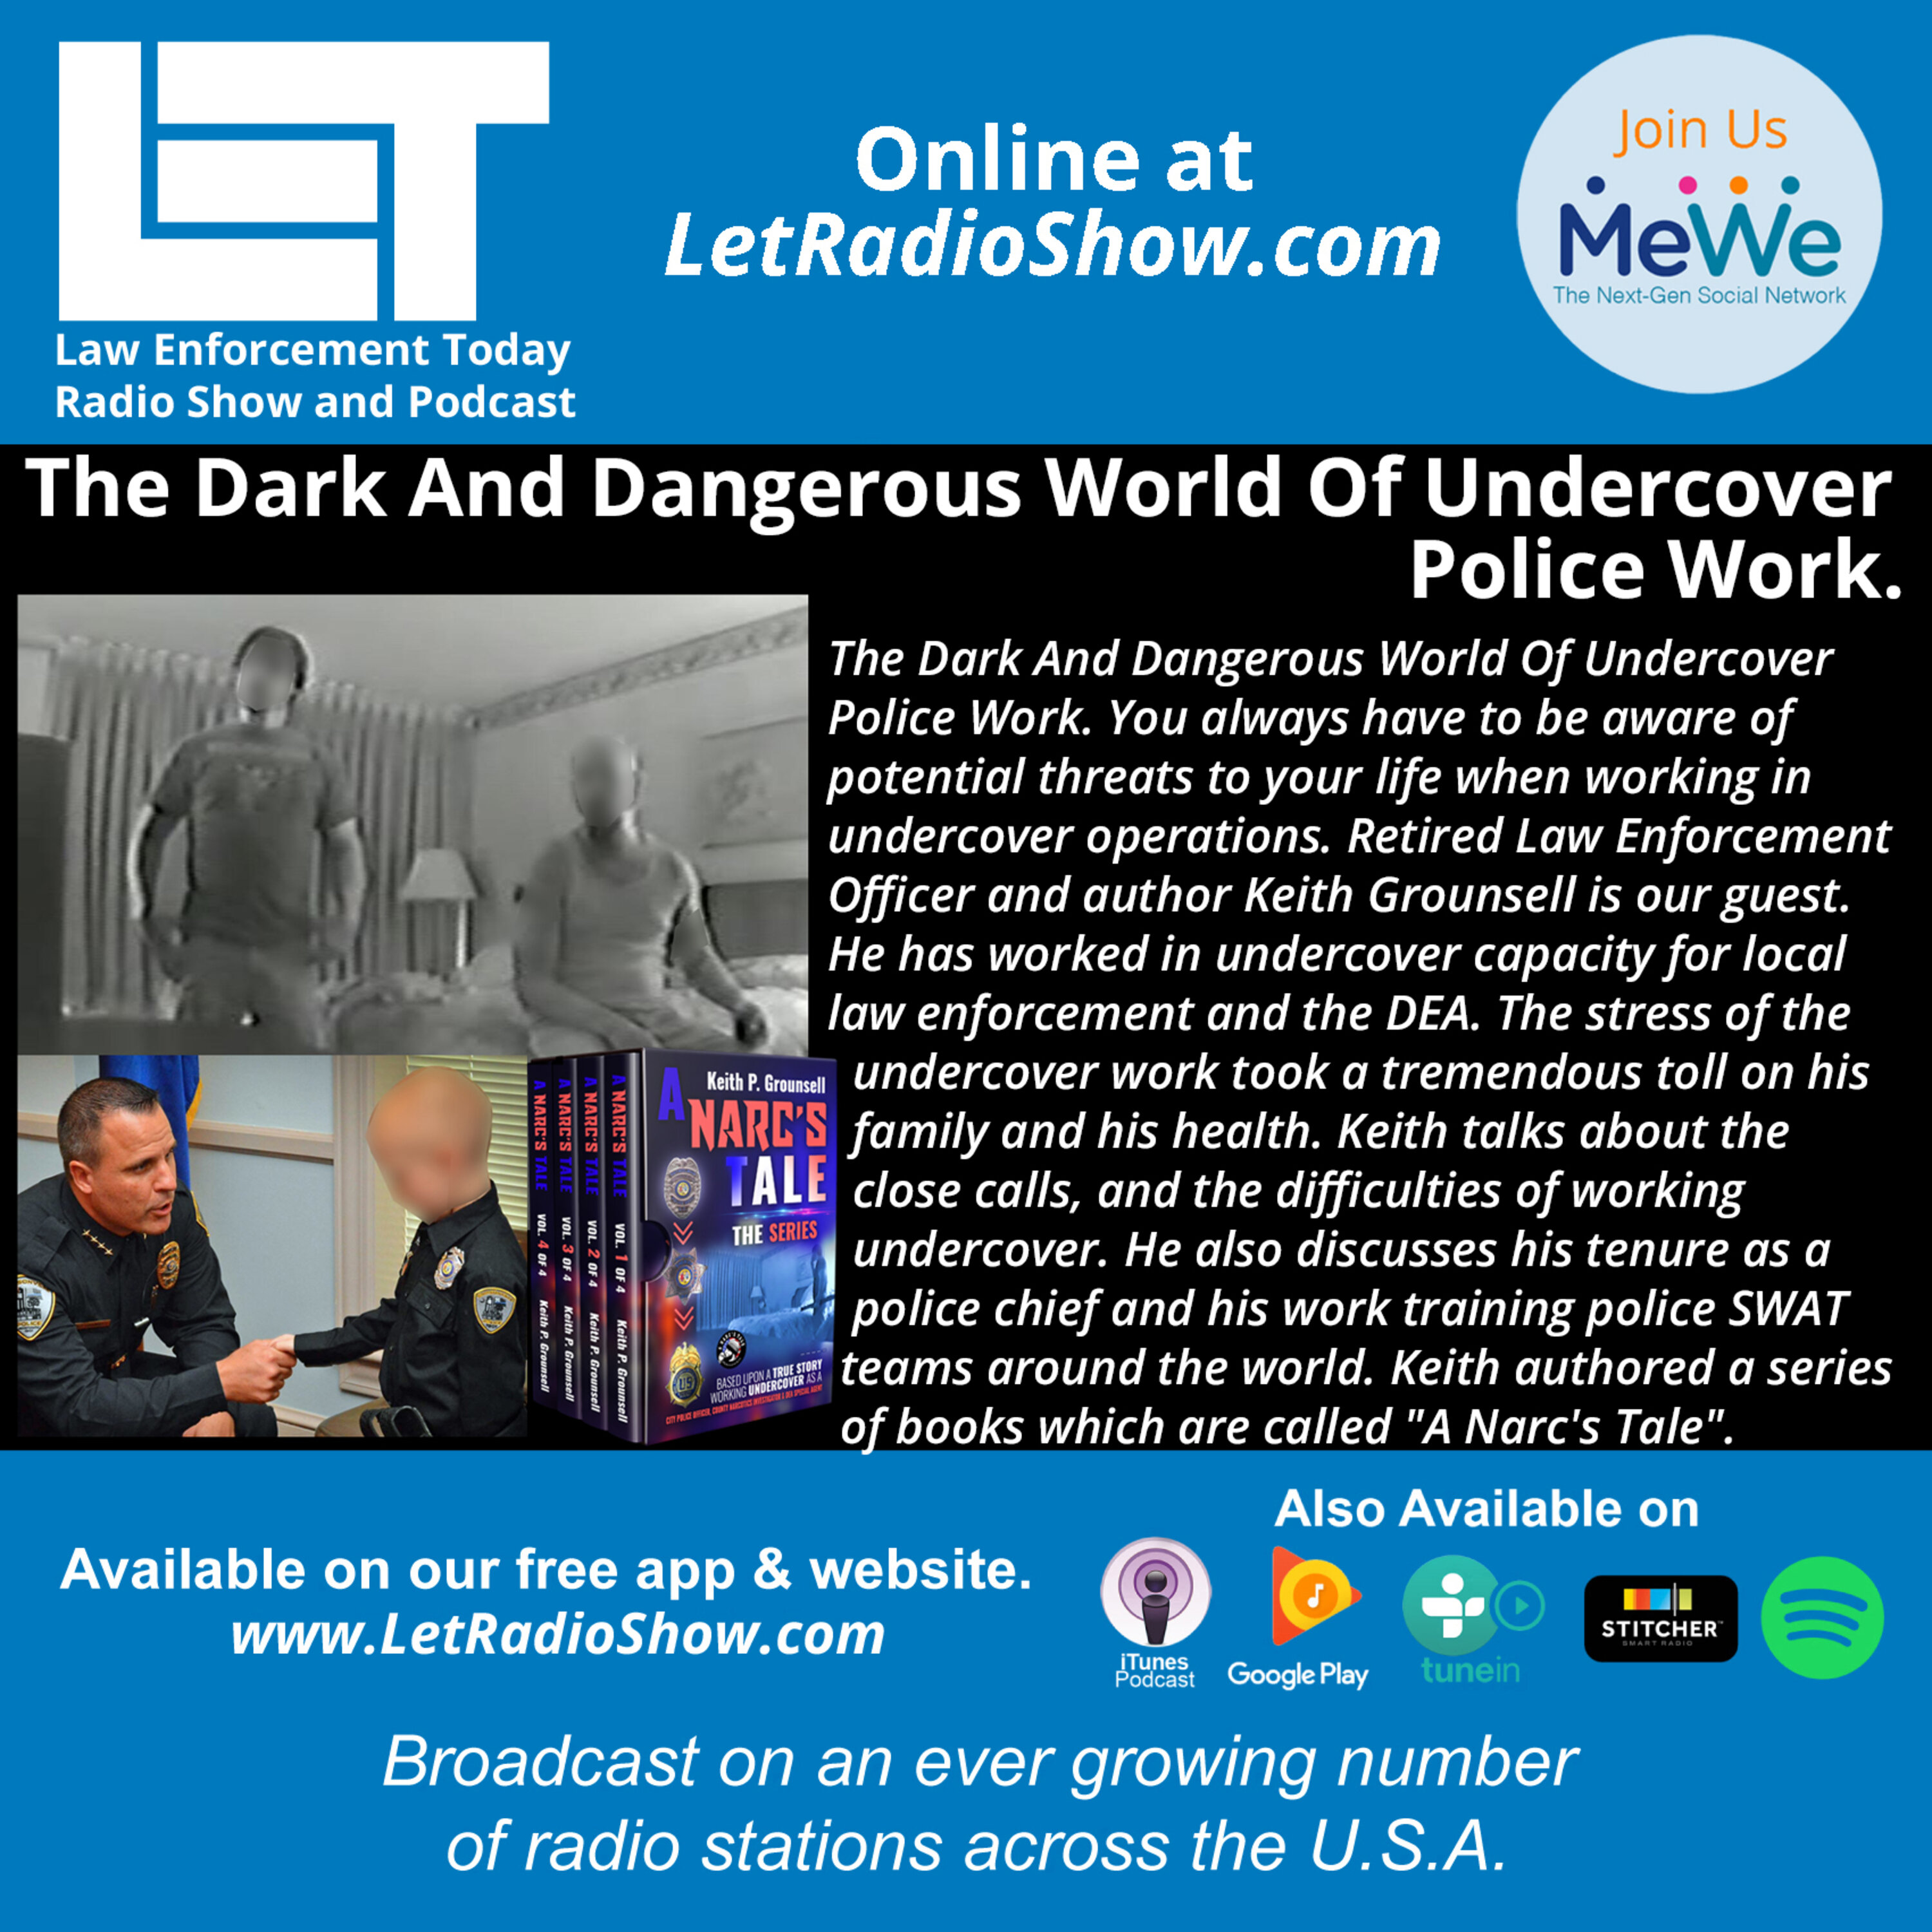 S5E20: The Dark And Dangerous World Of Undercover Police Work.